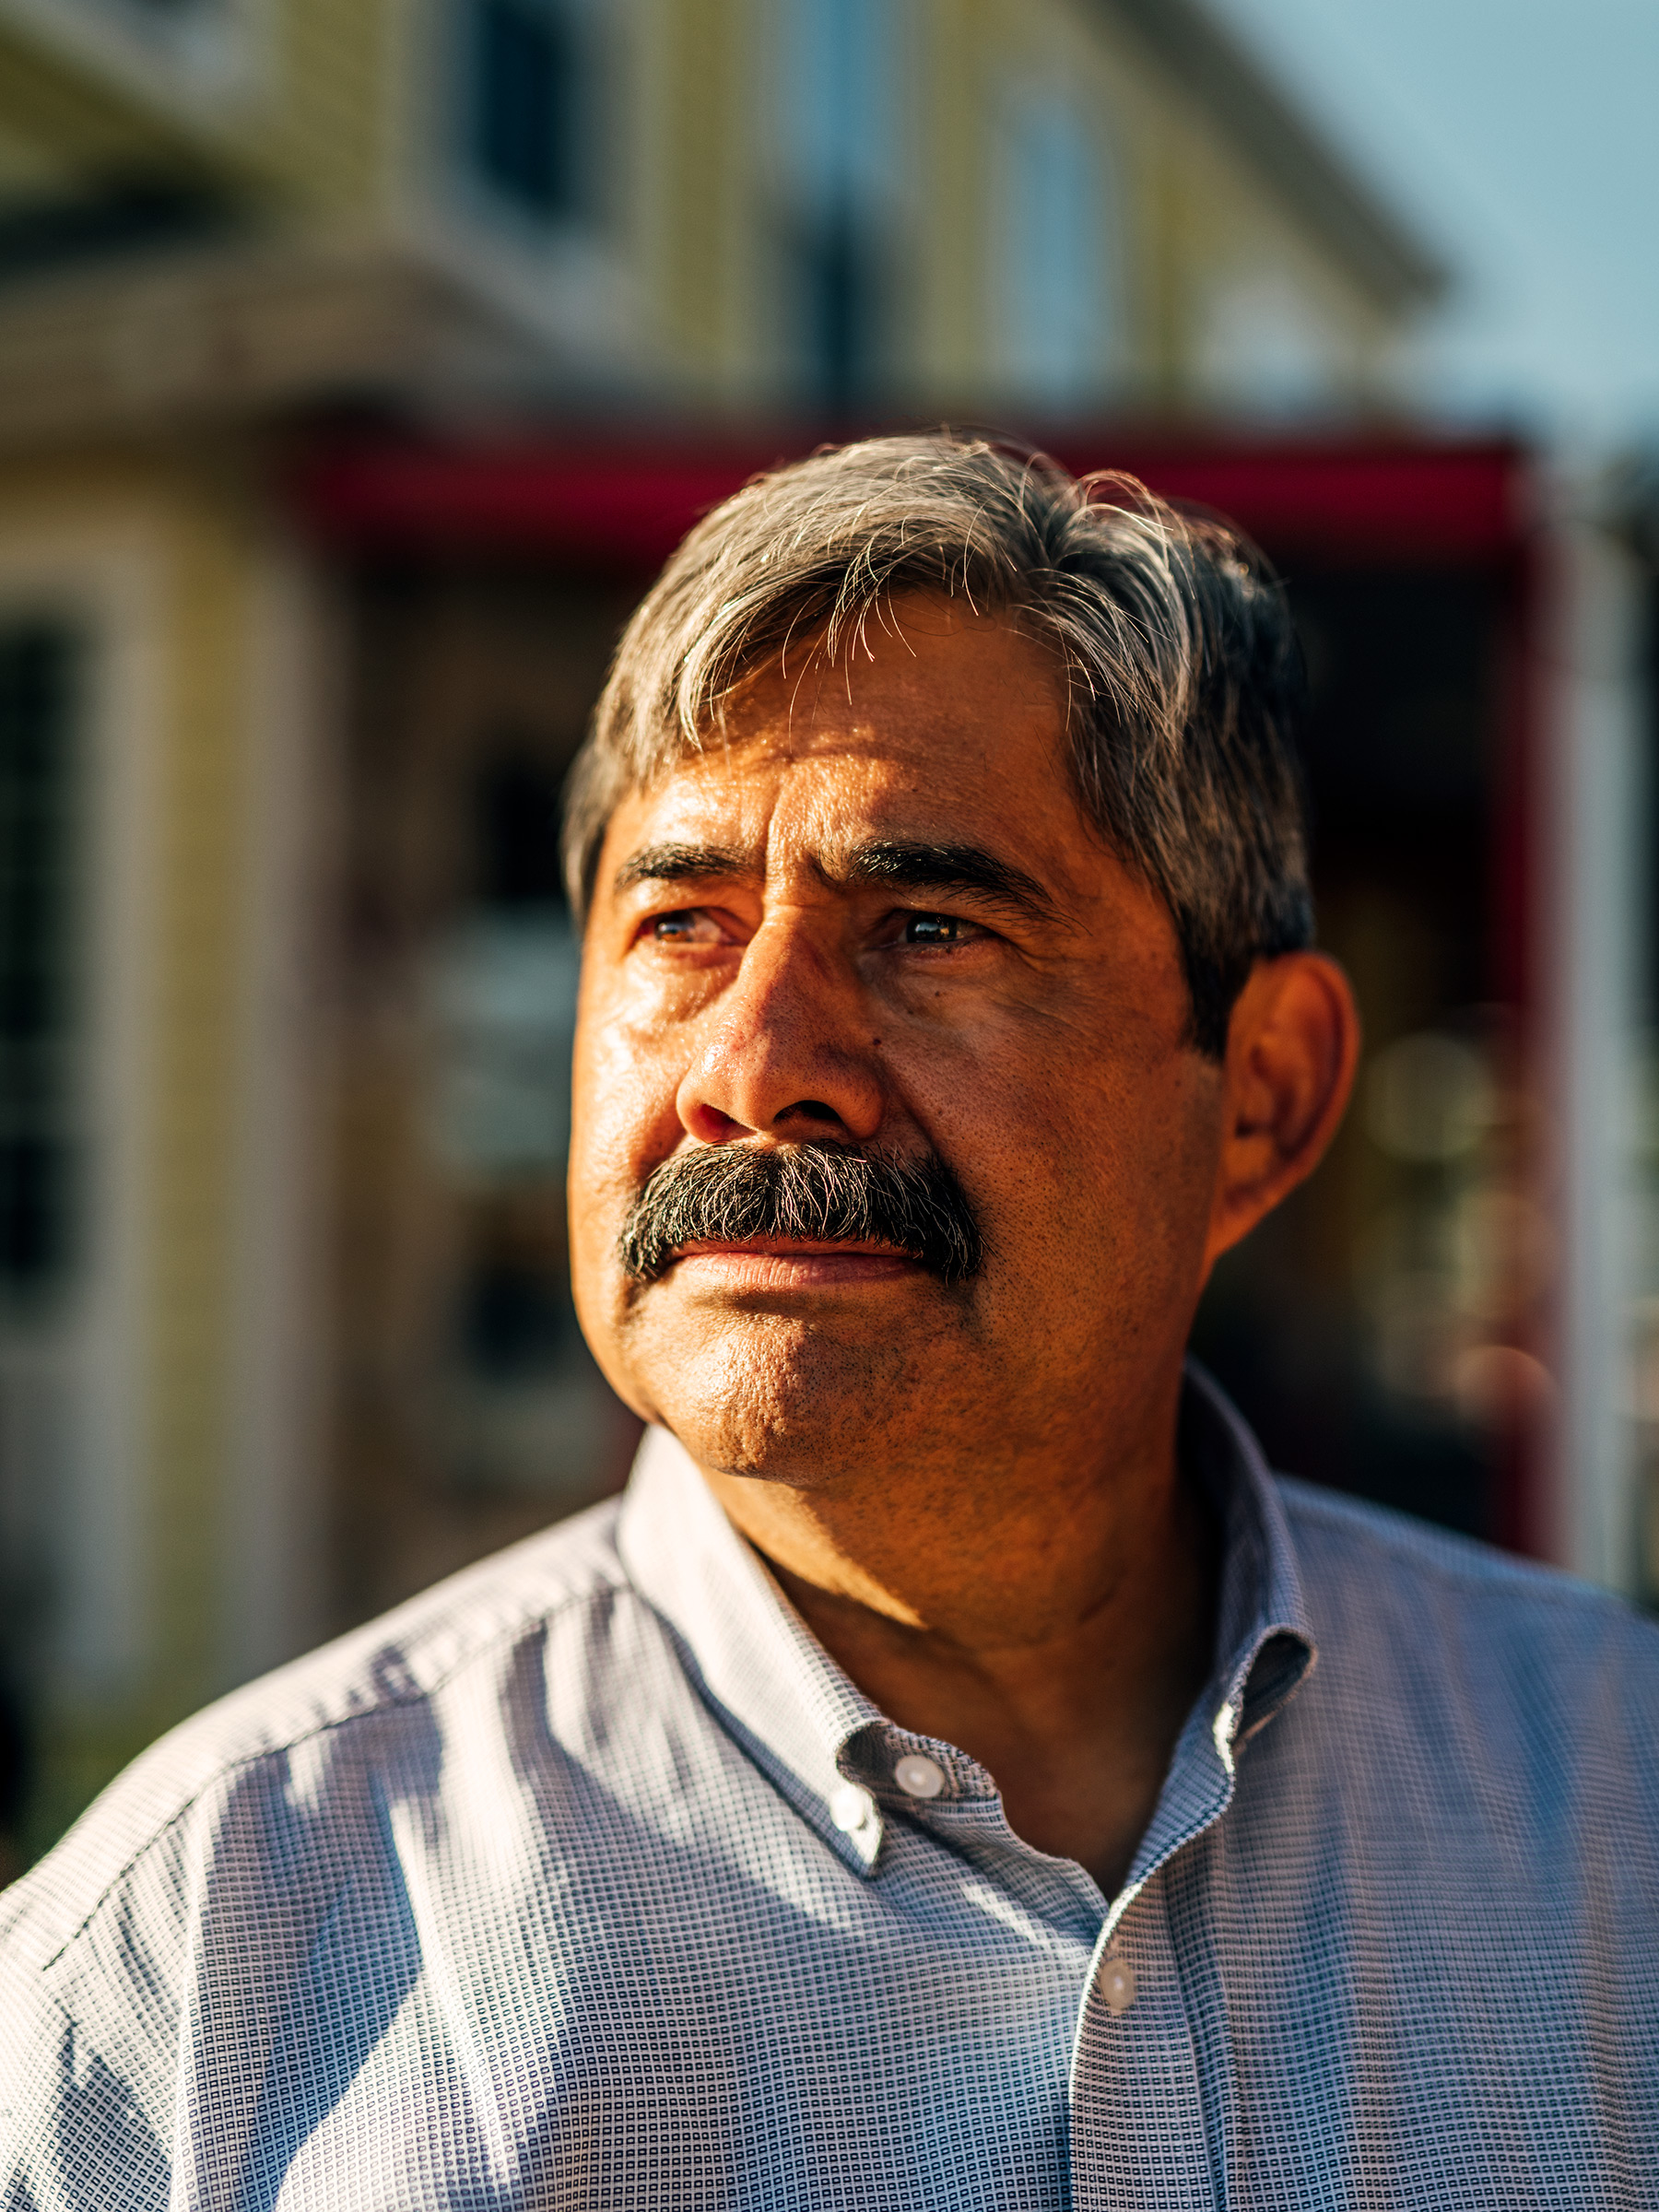 Macias, 56, opened his local bar, Jaime’s Place, in October 2020, during the pandemic (Arturo Olmos for TIME)